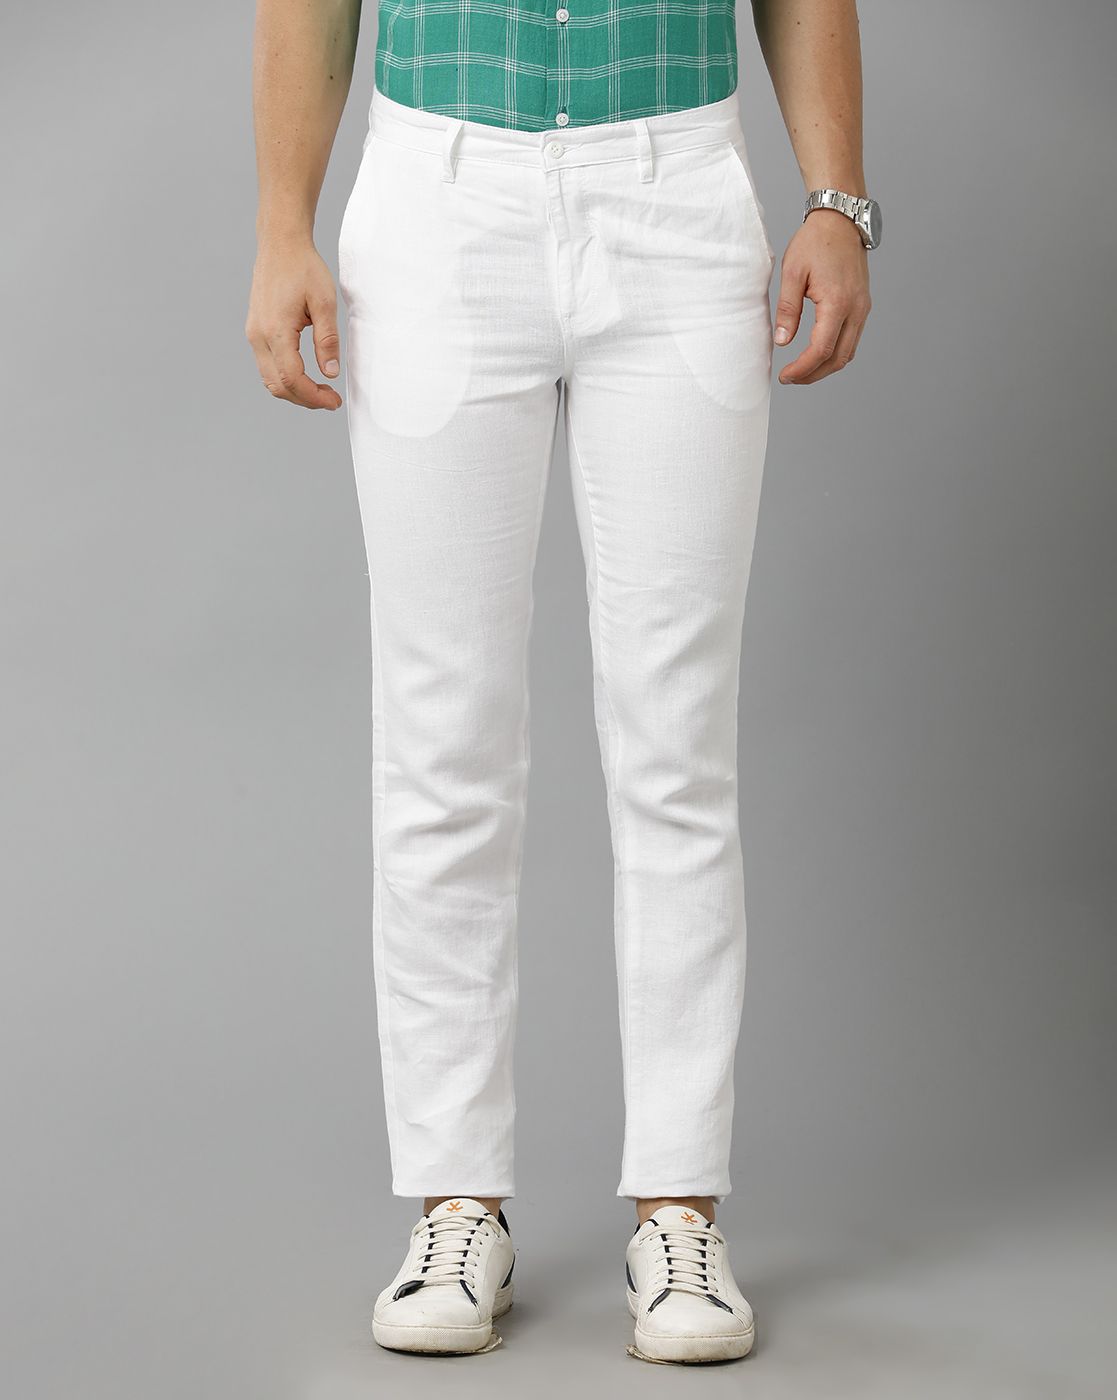 Buy White Trousers  Pants for Women by WINERED Online  Ajiocom